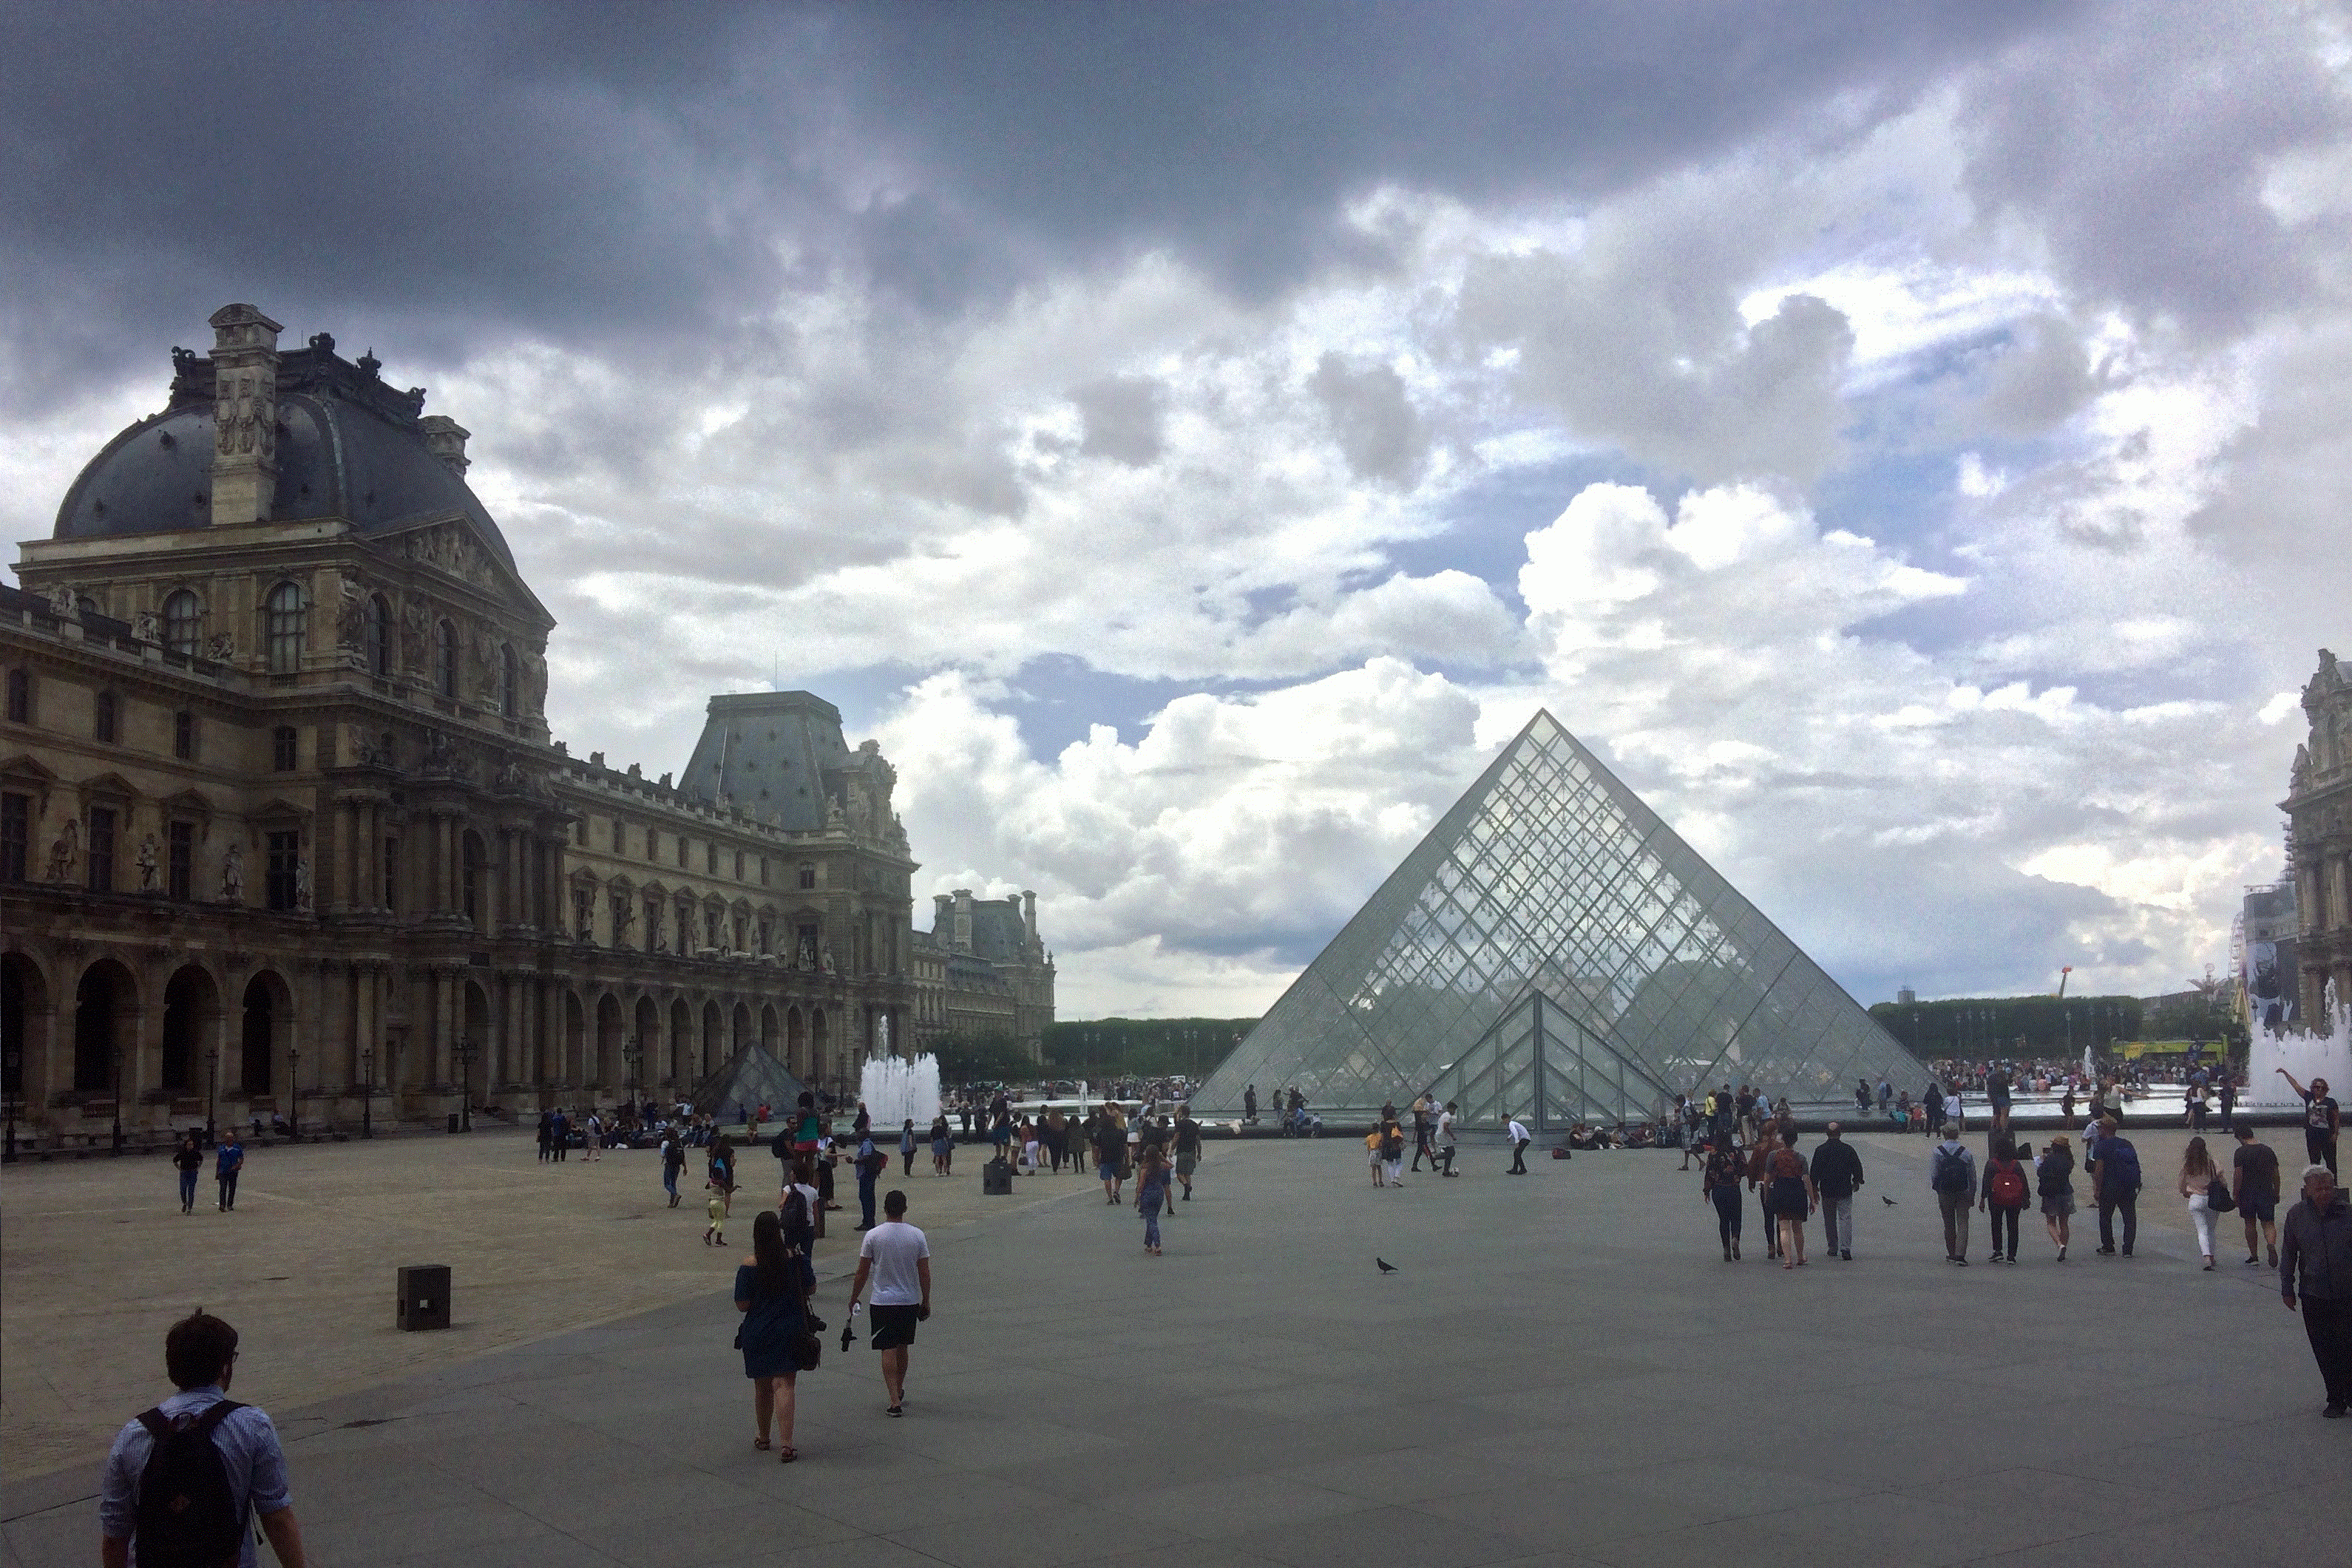 "Ominous rain clouds sweep across a Parisian sky. The glass pyramid of the Louvre rises up to meet the storm." Image and text by Liam Kennedy. France, 2017.